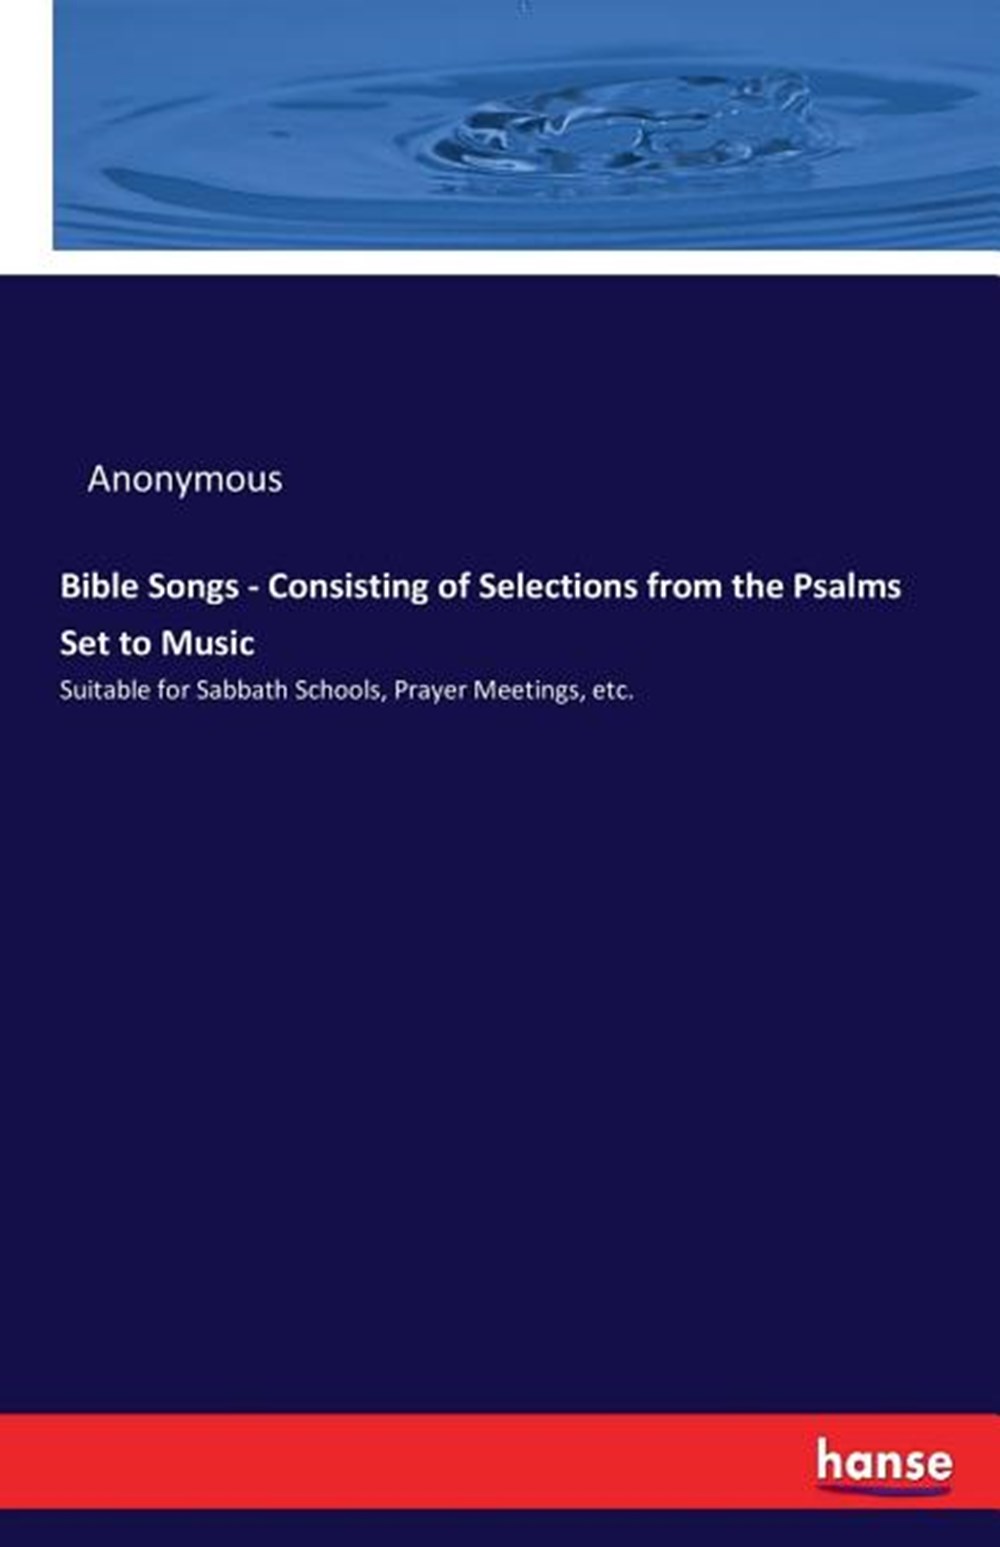 Bible Songs - Consisting of Selections from the Psalms Set to Music: Suitable for Sabbath Schools, P